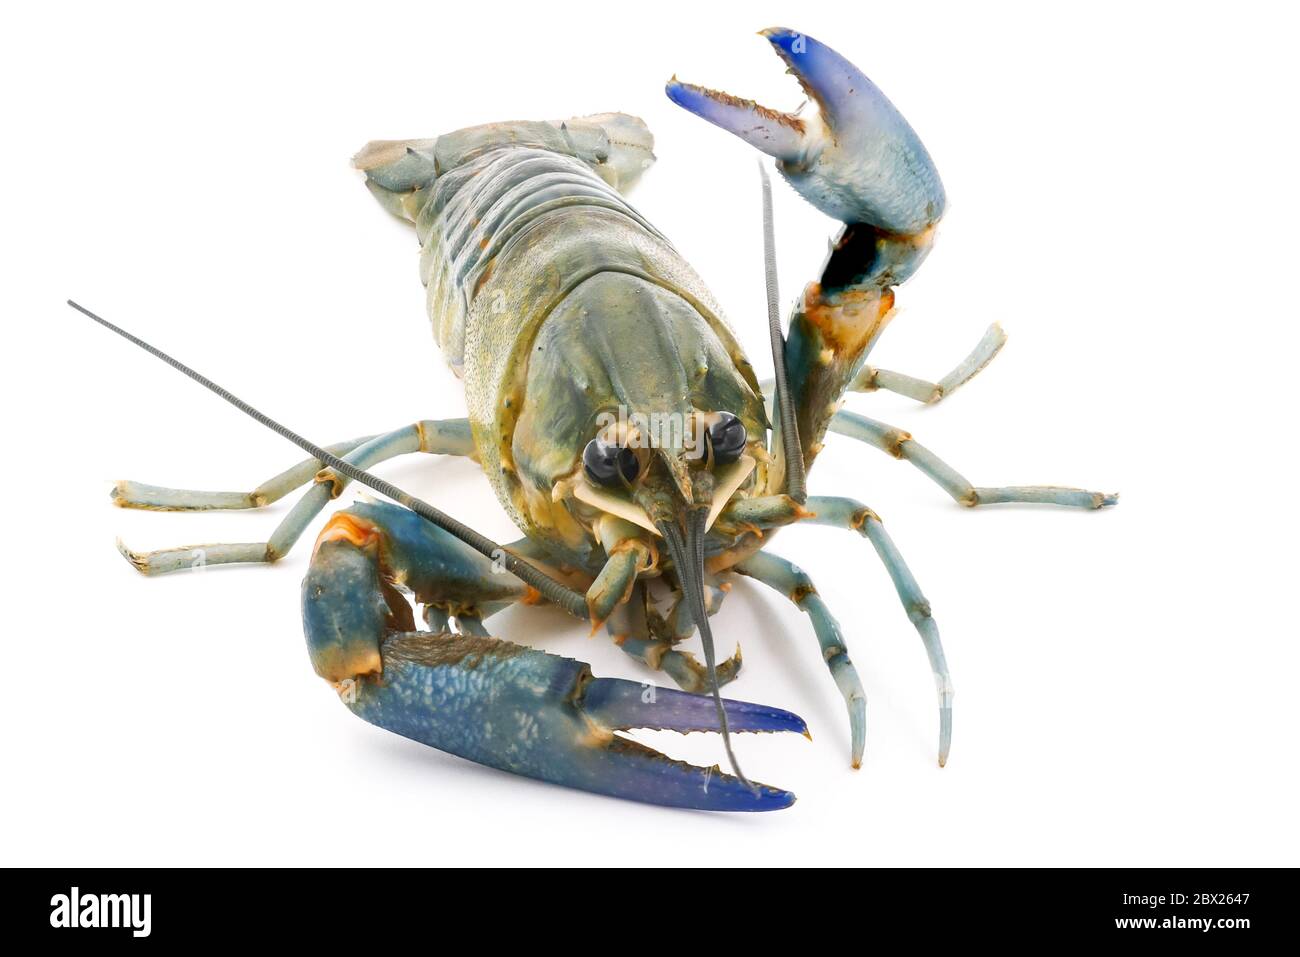 Crayfish or Freshwater lobster on a white background. Stock Photo